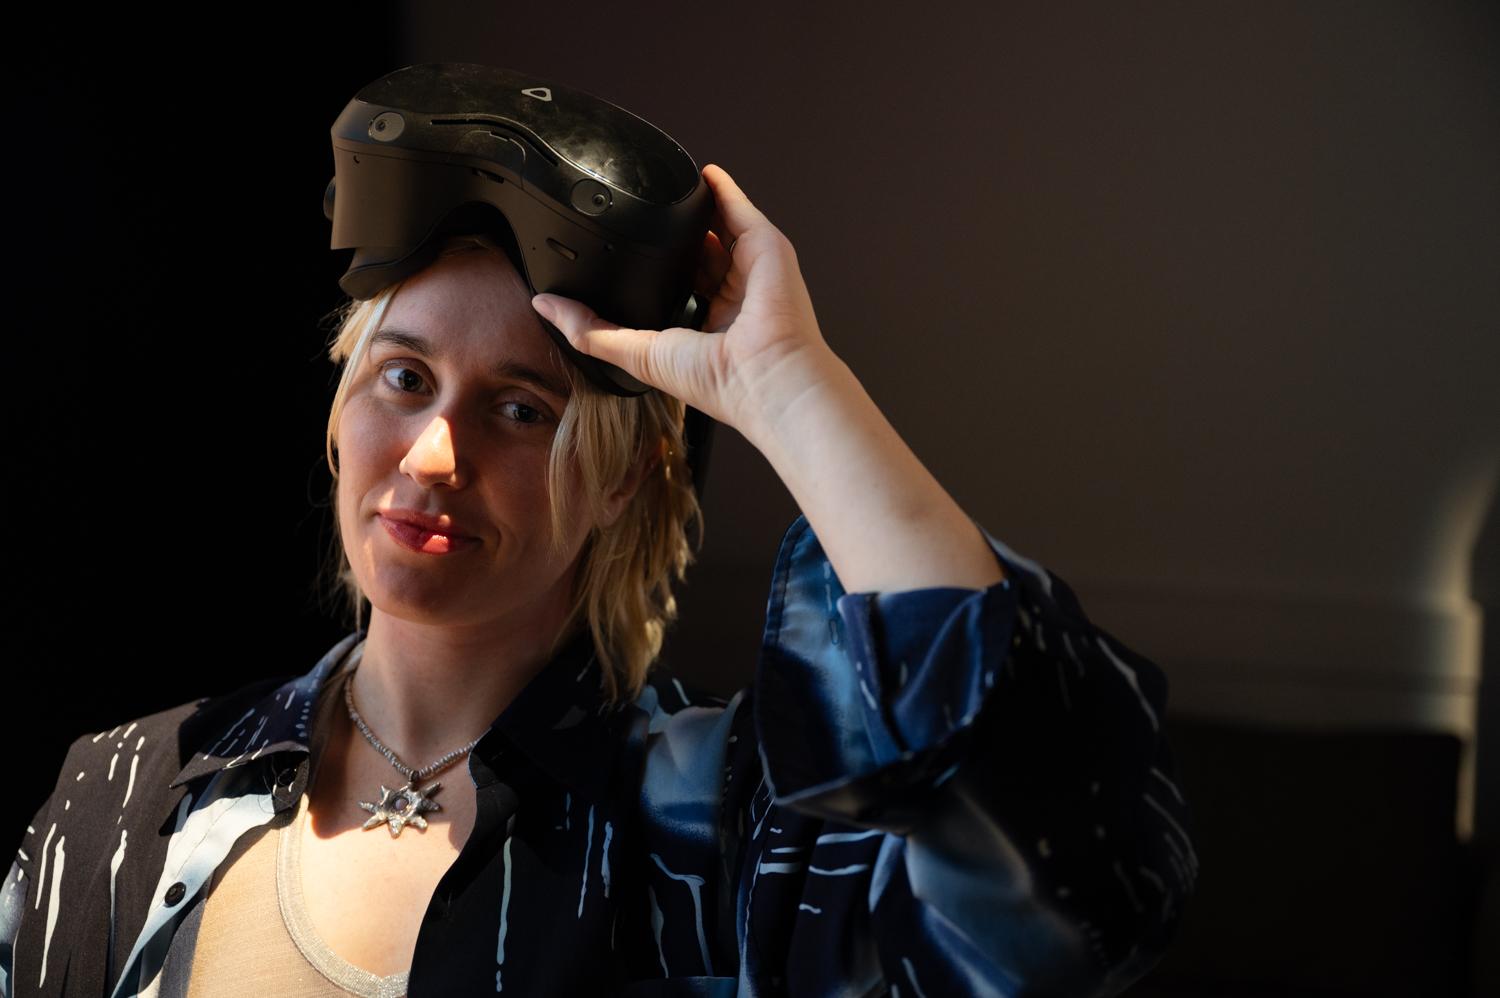 Individual with blonde hair and wearing a leather jacket is lifting their VR headset to look into the camera. 